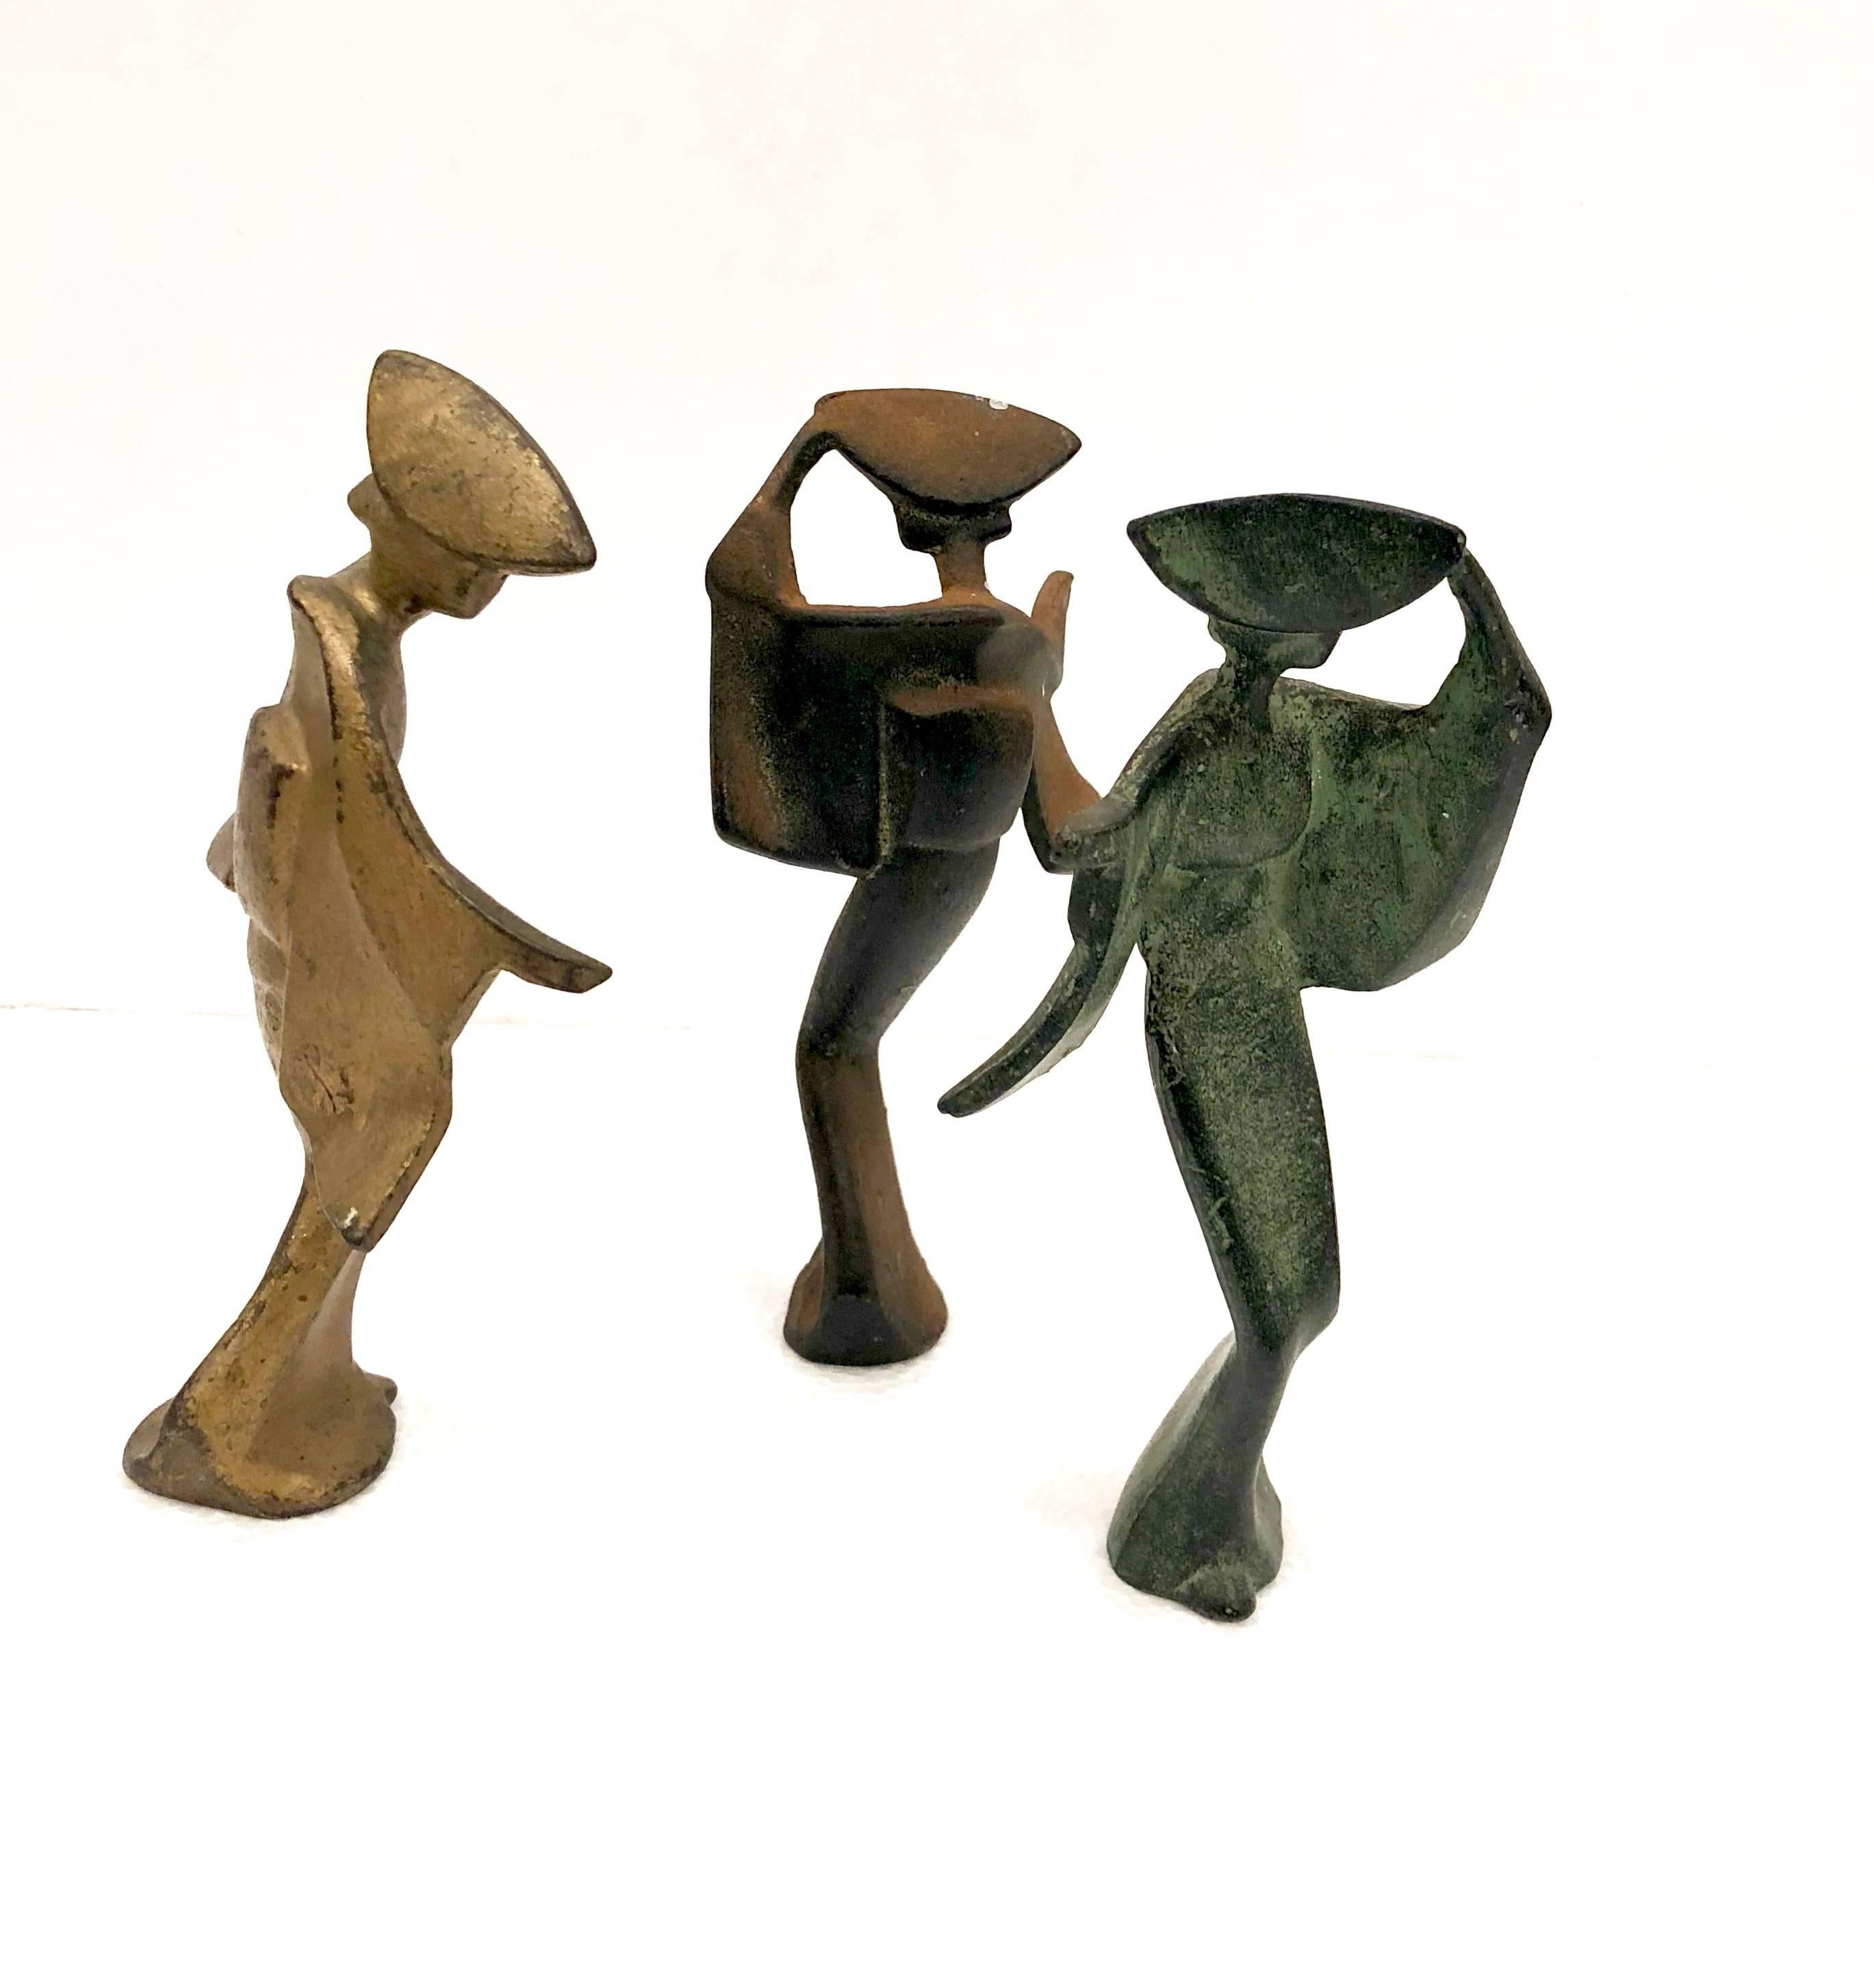 Nice set of three patinated metals Japanese geisha figurines, circa 1950s. The pieces are heavy and solid and have a real nice dark patina; in a bronze, copper and black finish they would make a great Mid-Century Modern accent in any space!